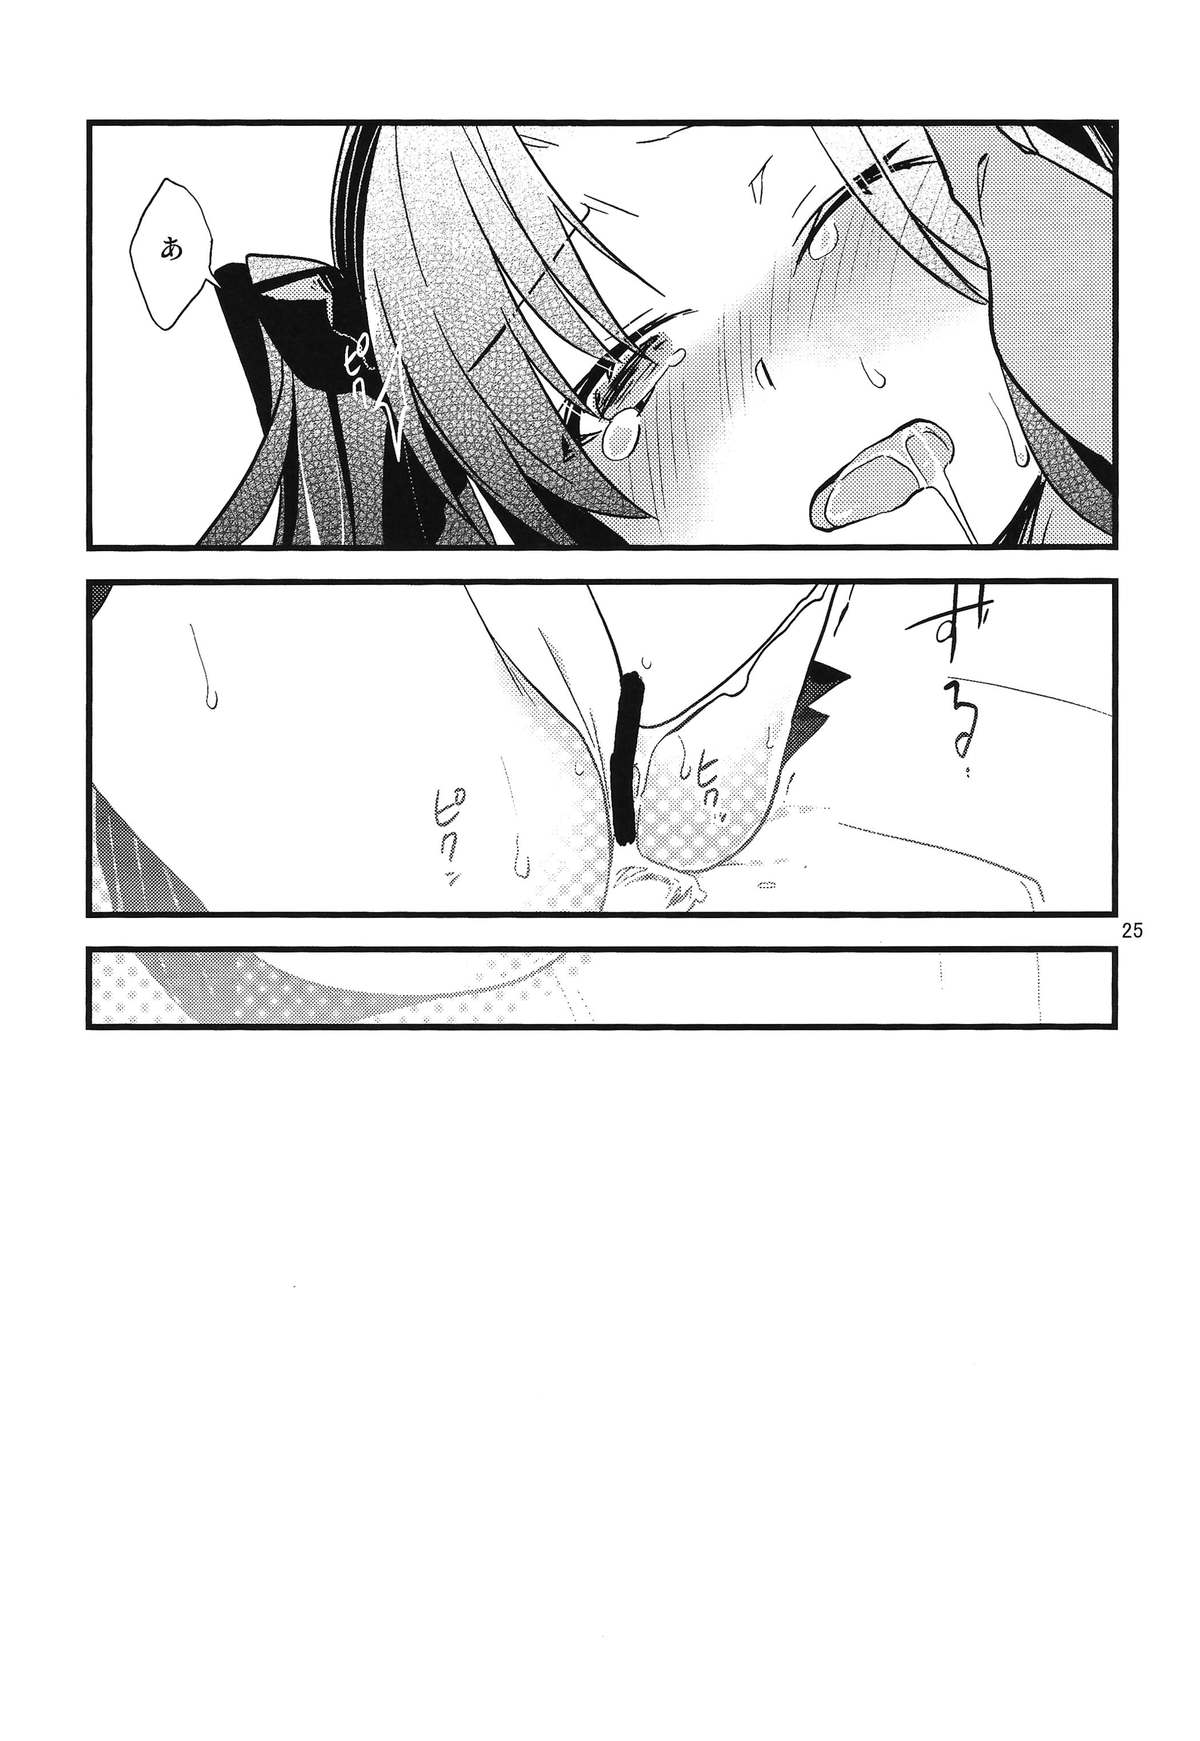 (COMIC1☆9) [云元書庫 (云元)] BERRY VERY BELLY (Fate/stay night)